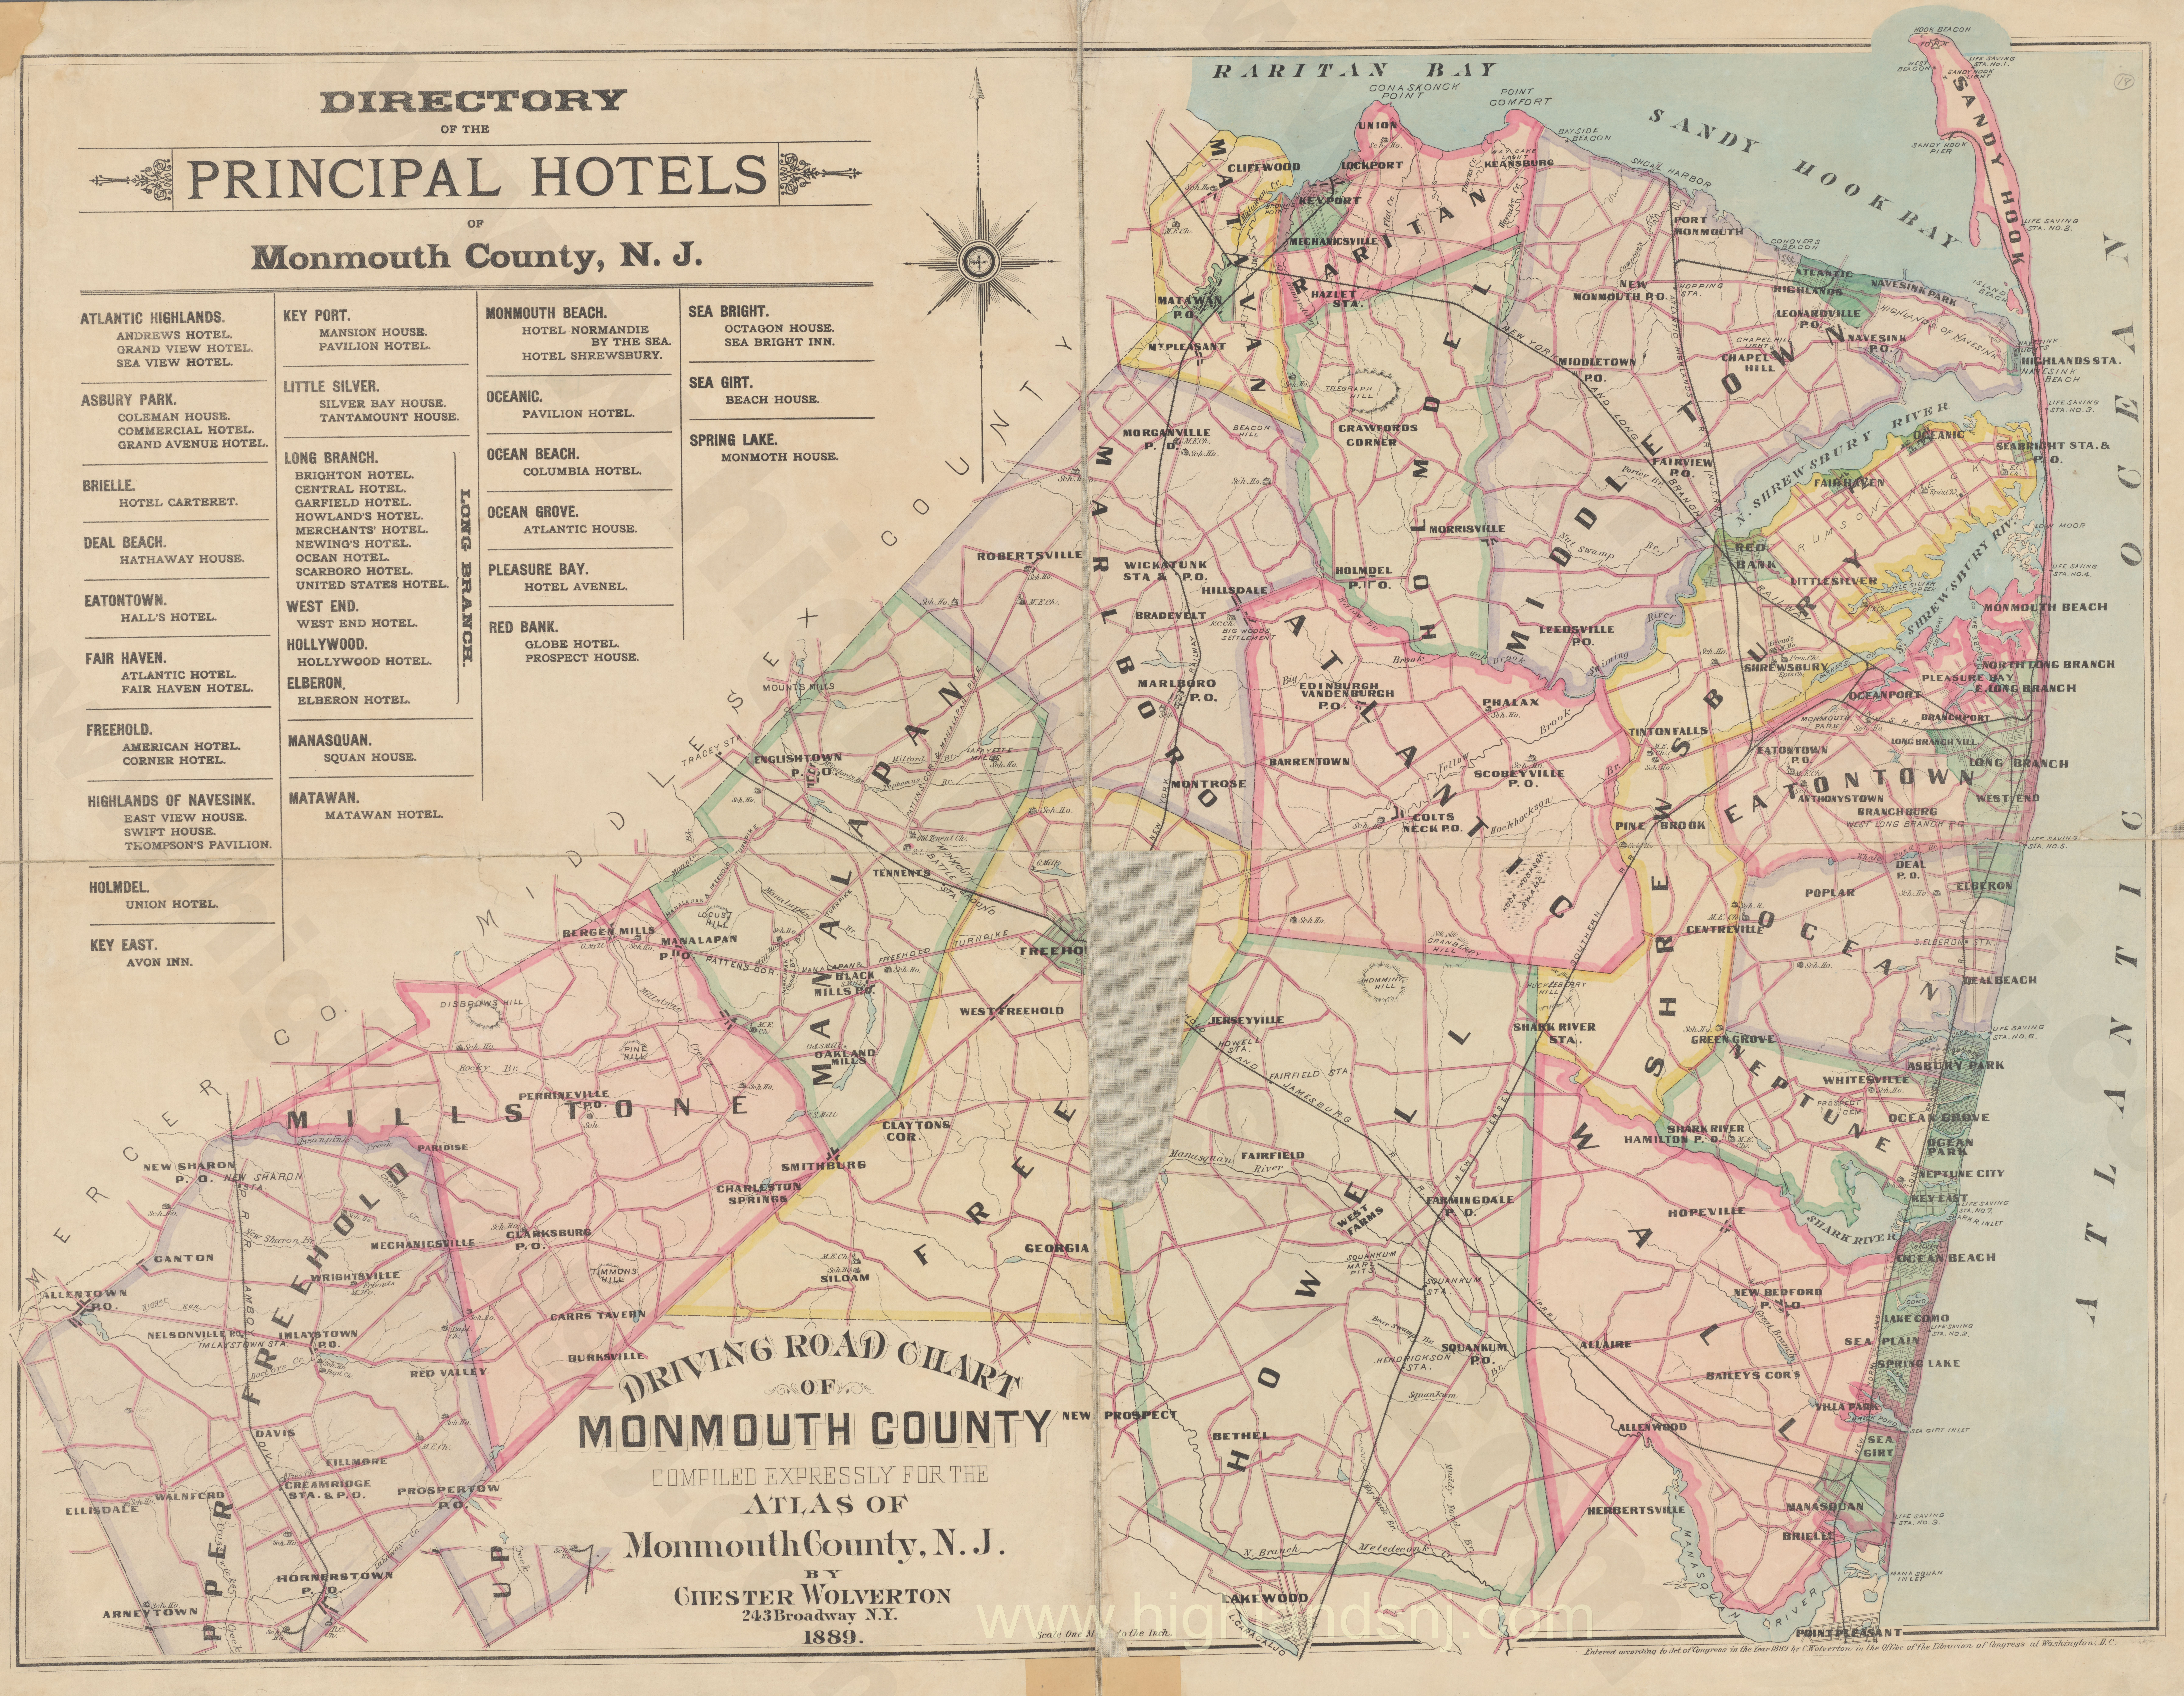 1889 Map of Driving road chart of Monmouth County Principal Hotels